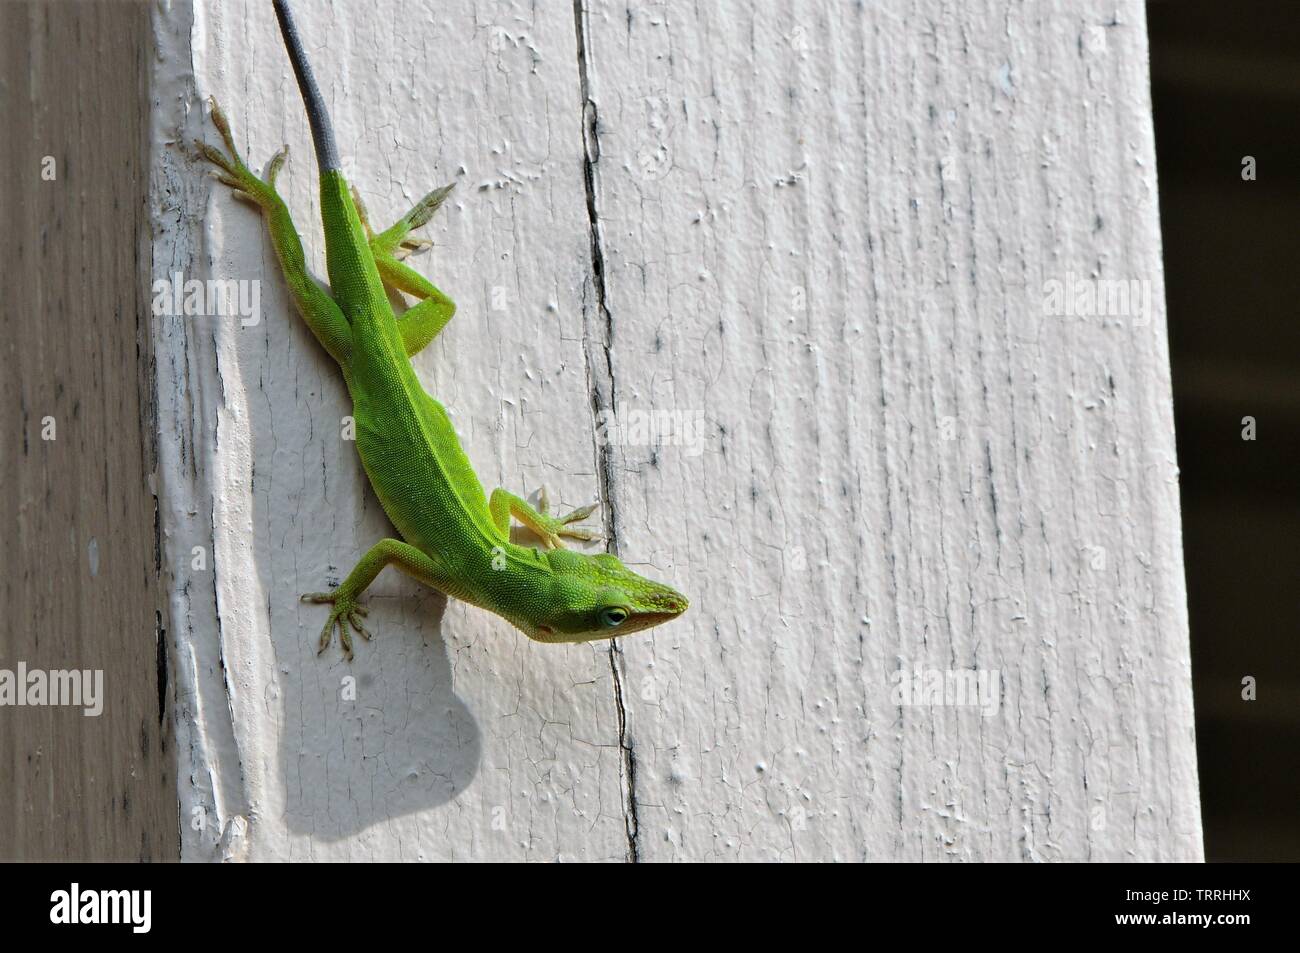 The green anole, the American chameleon. Stock Photo